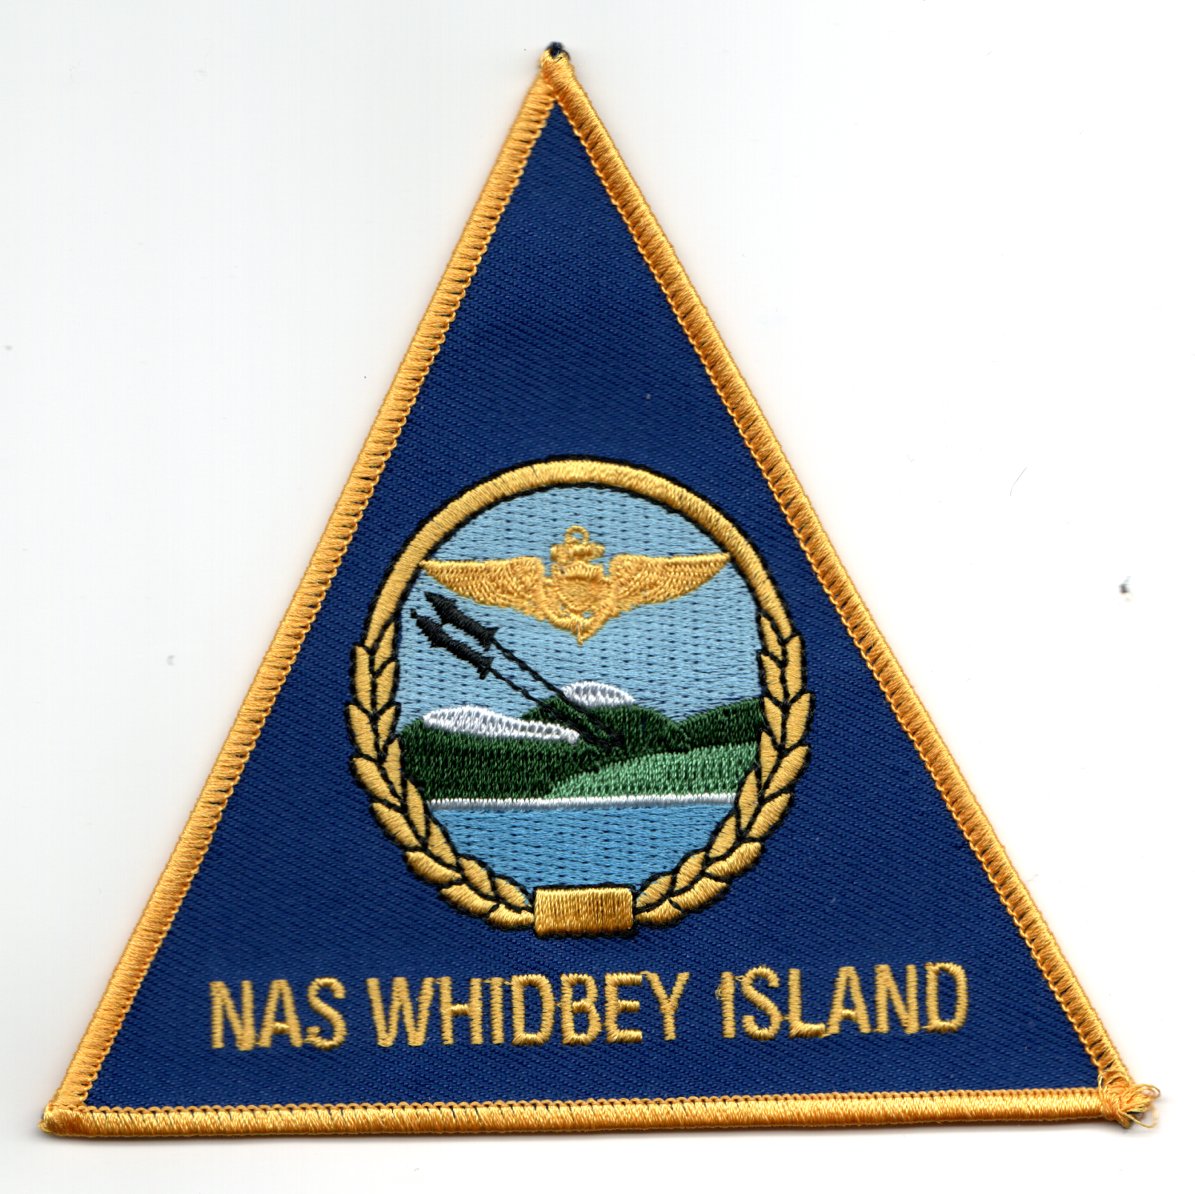 NAS Whidbey Island Patch